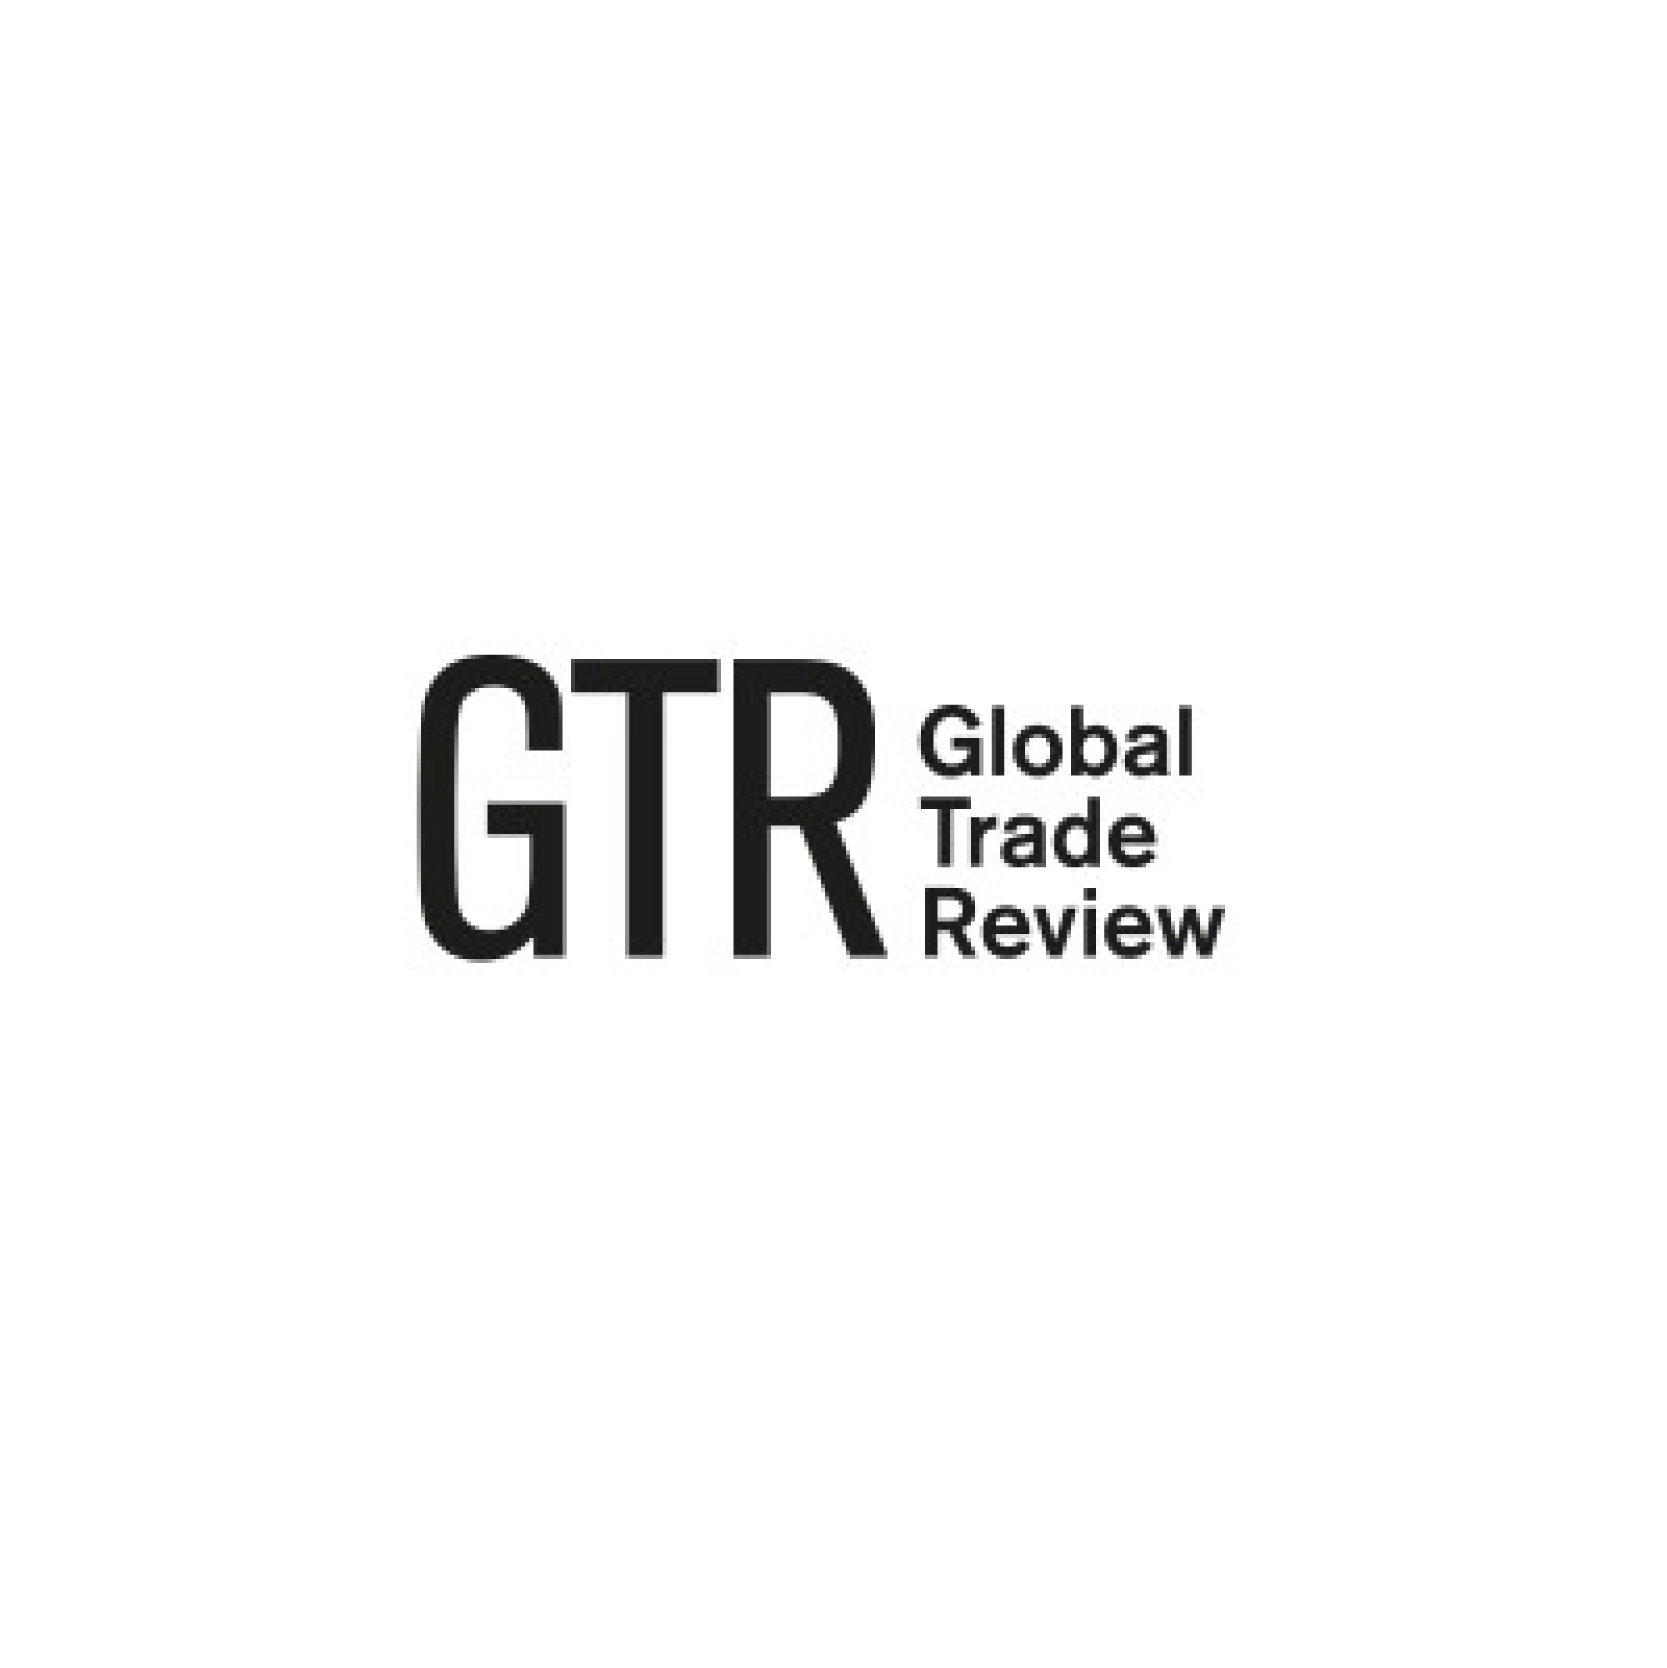 Global Trade Review